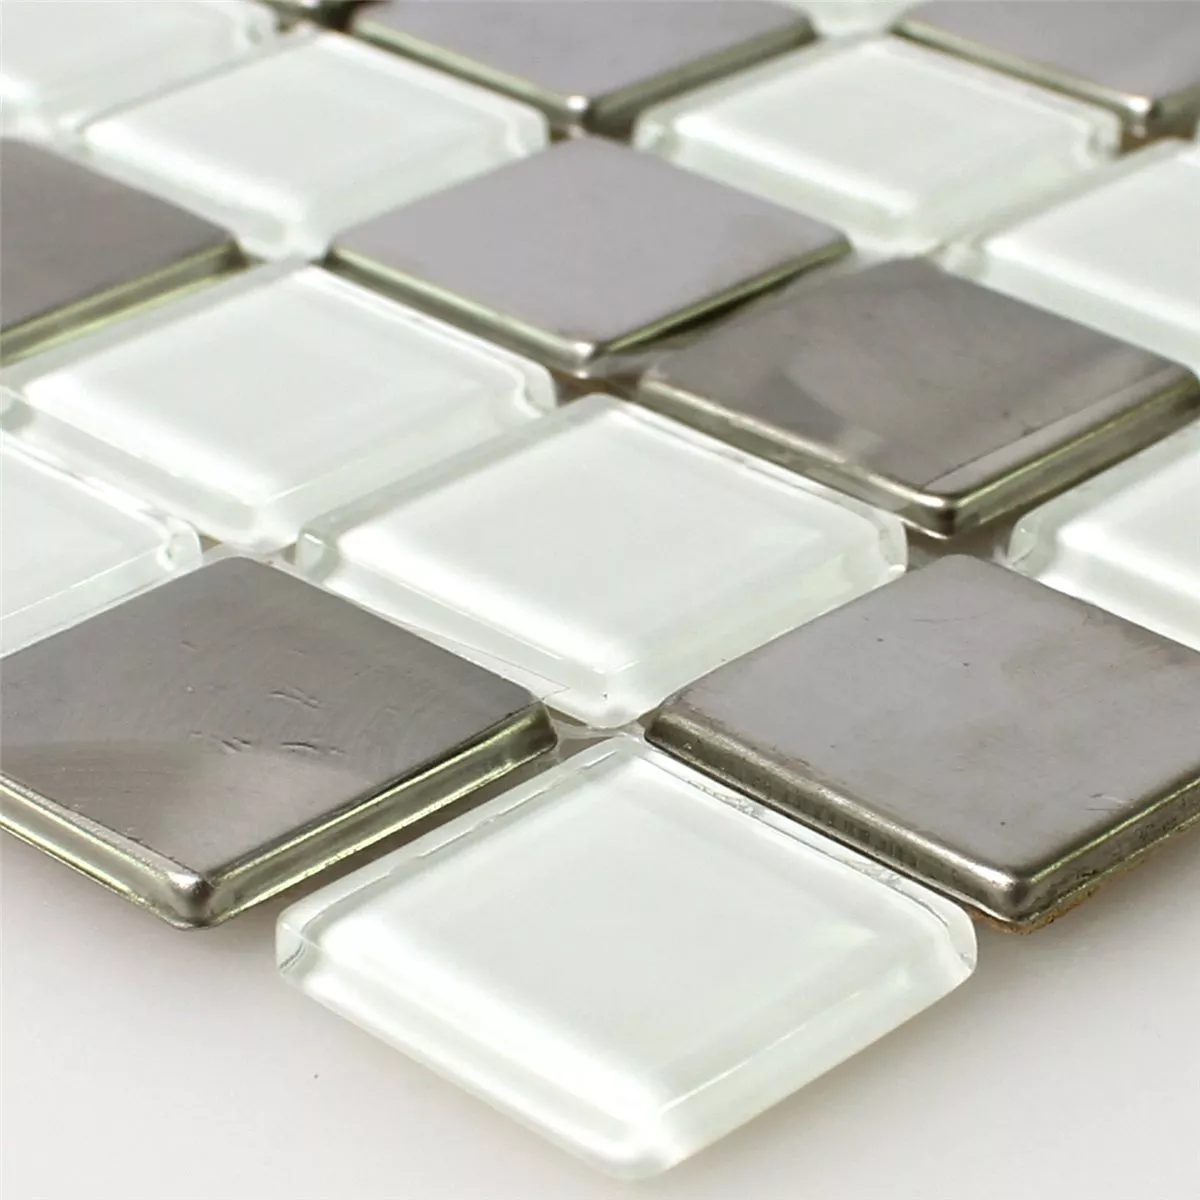 Sample Mosaic Tiles Stainless Steel Glass White Silver Mix